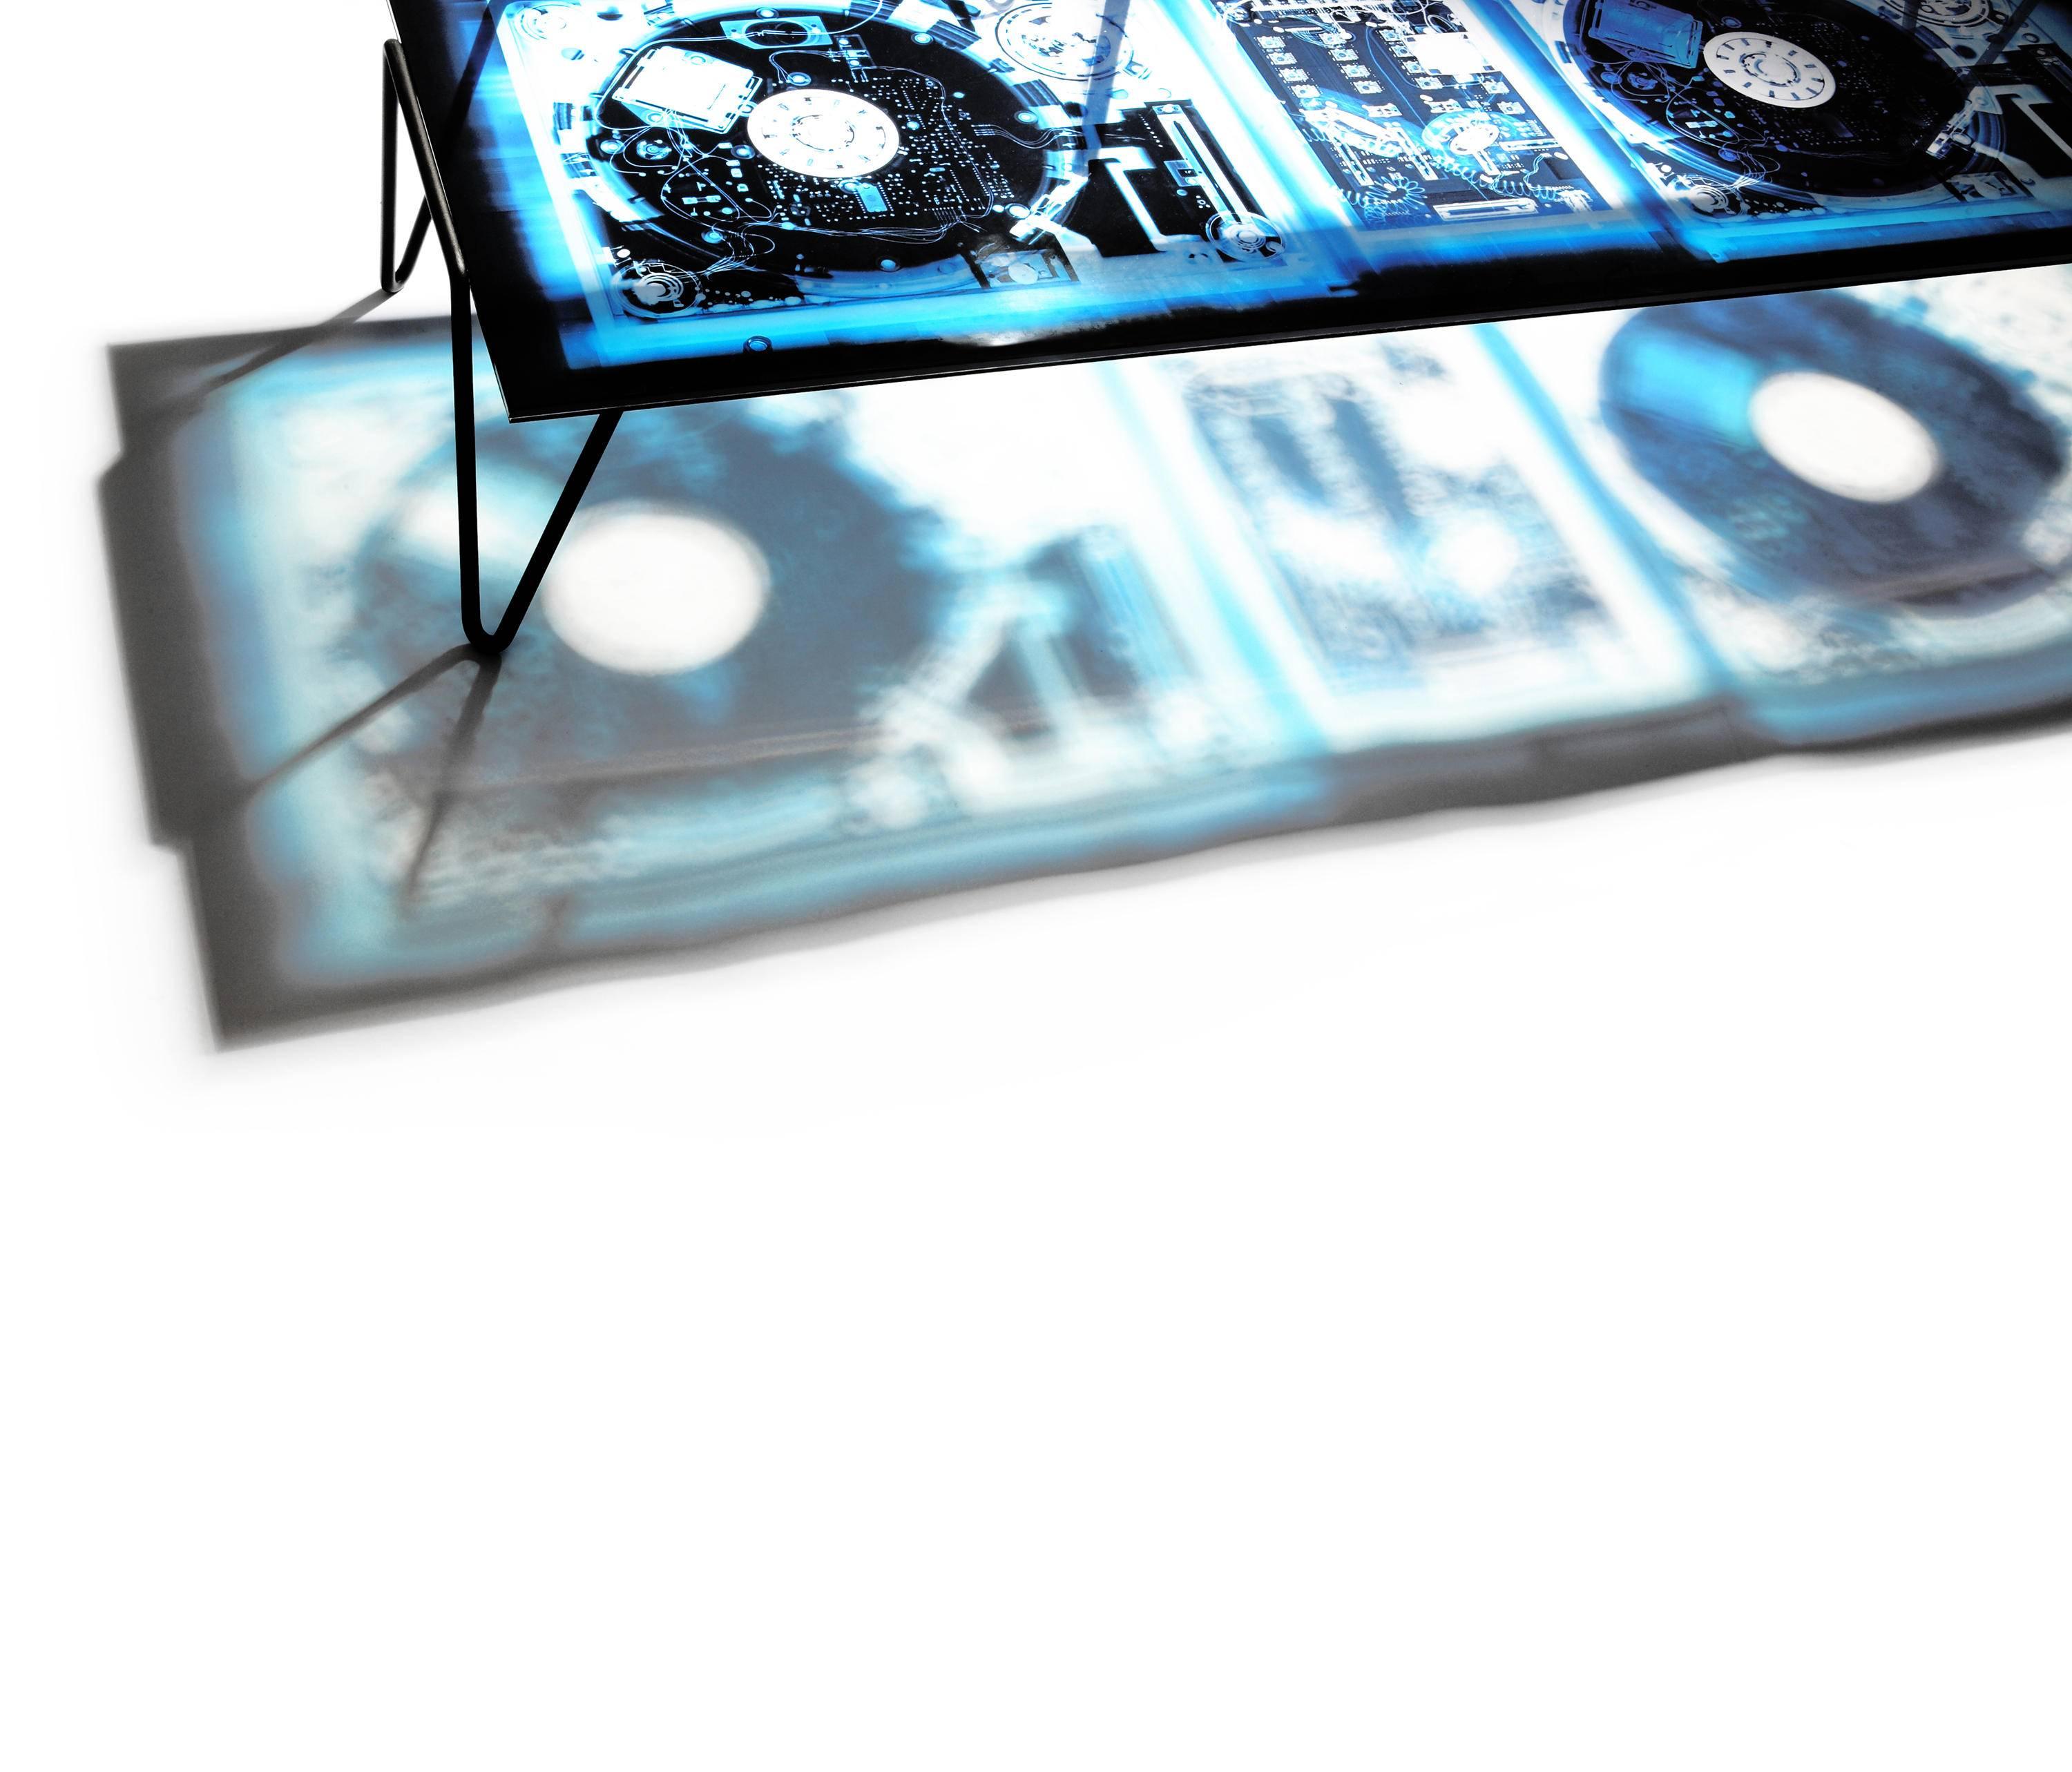 The x-rays of a dj console on glass use the colors of the night with shades from electric blue to black maintaining at the same time the transparency of glass. The effect is strong, evocative and very iconographic. The same x-rays process has been